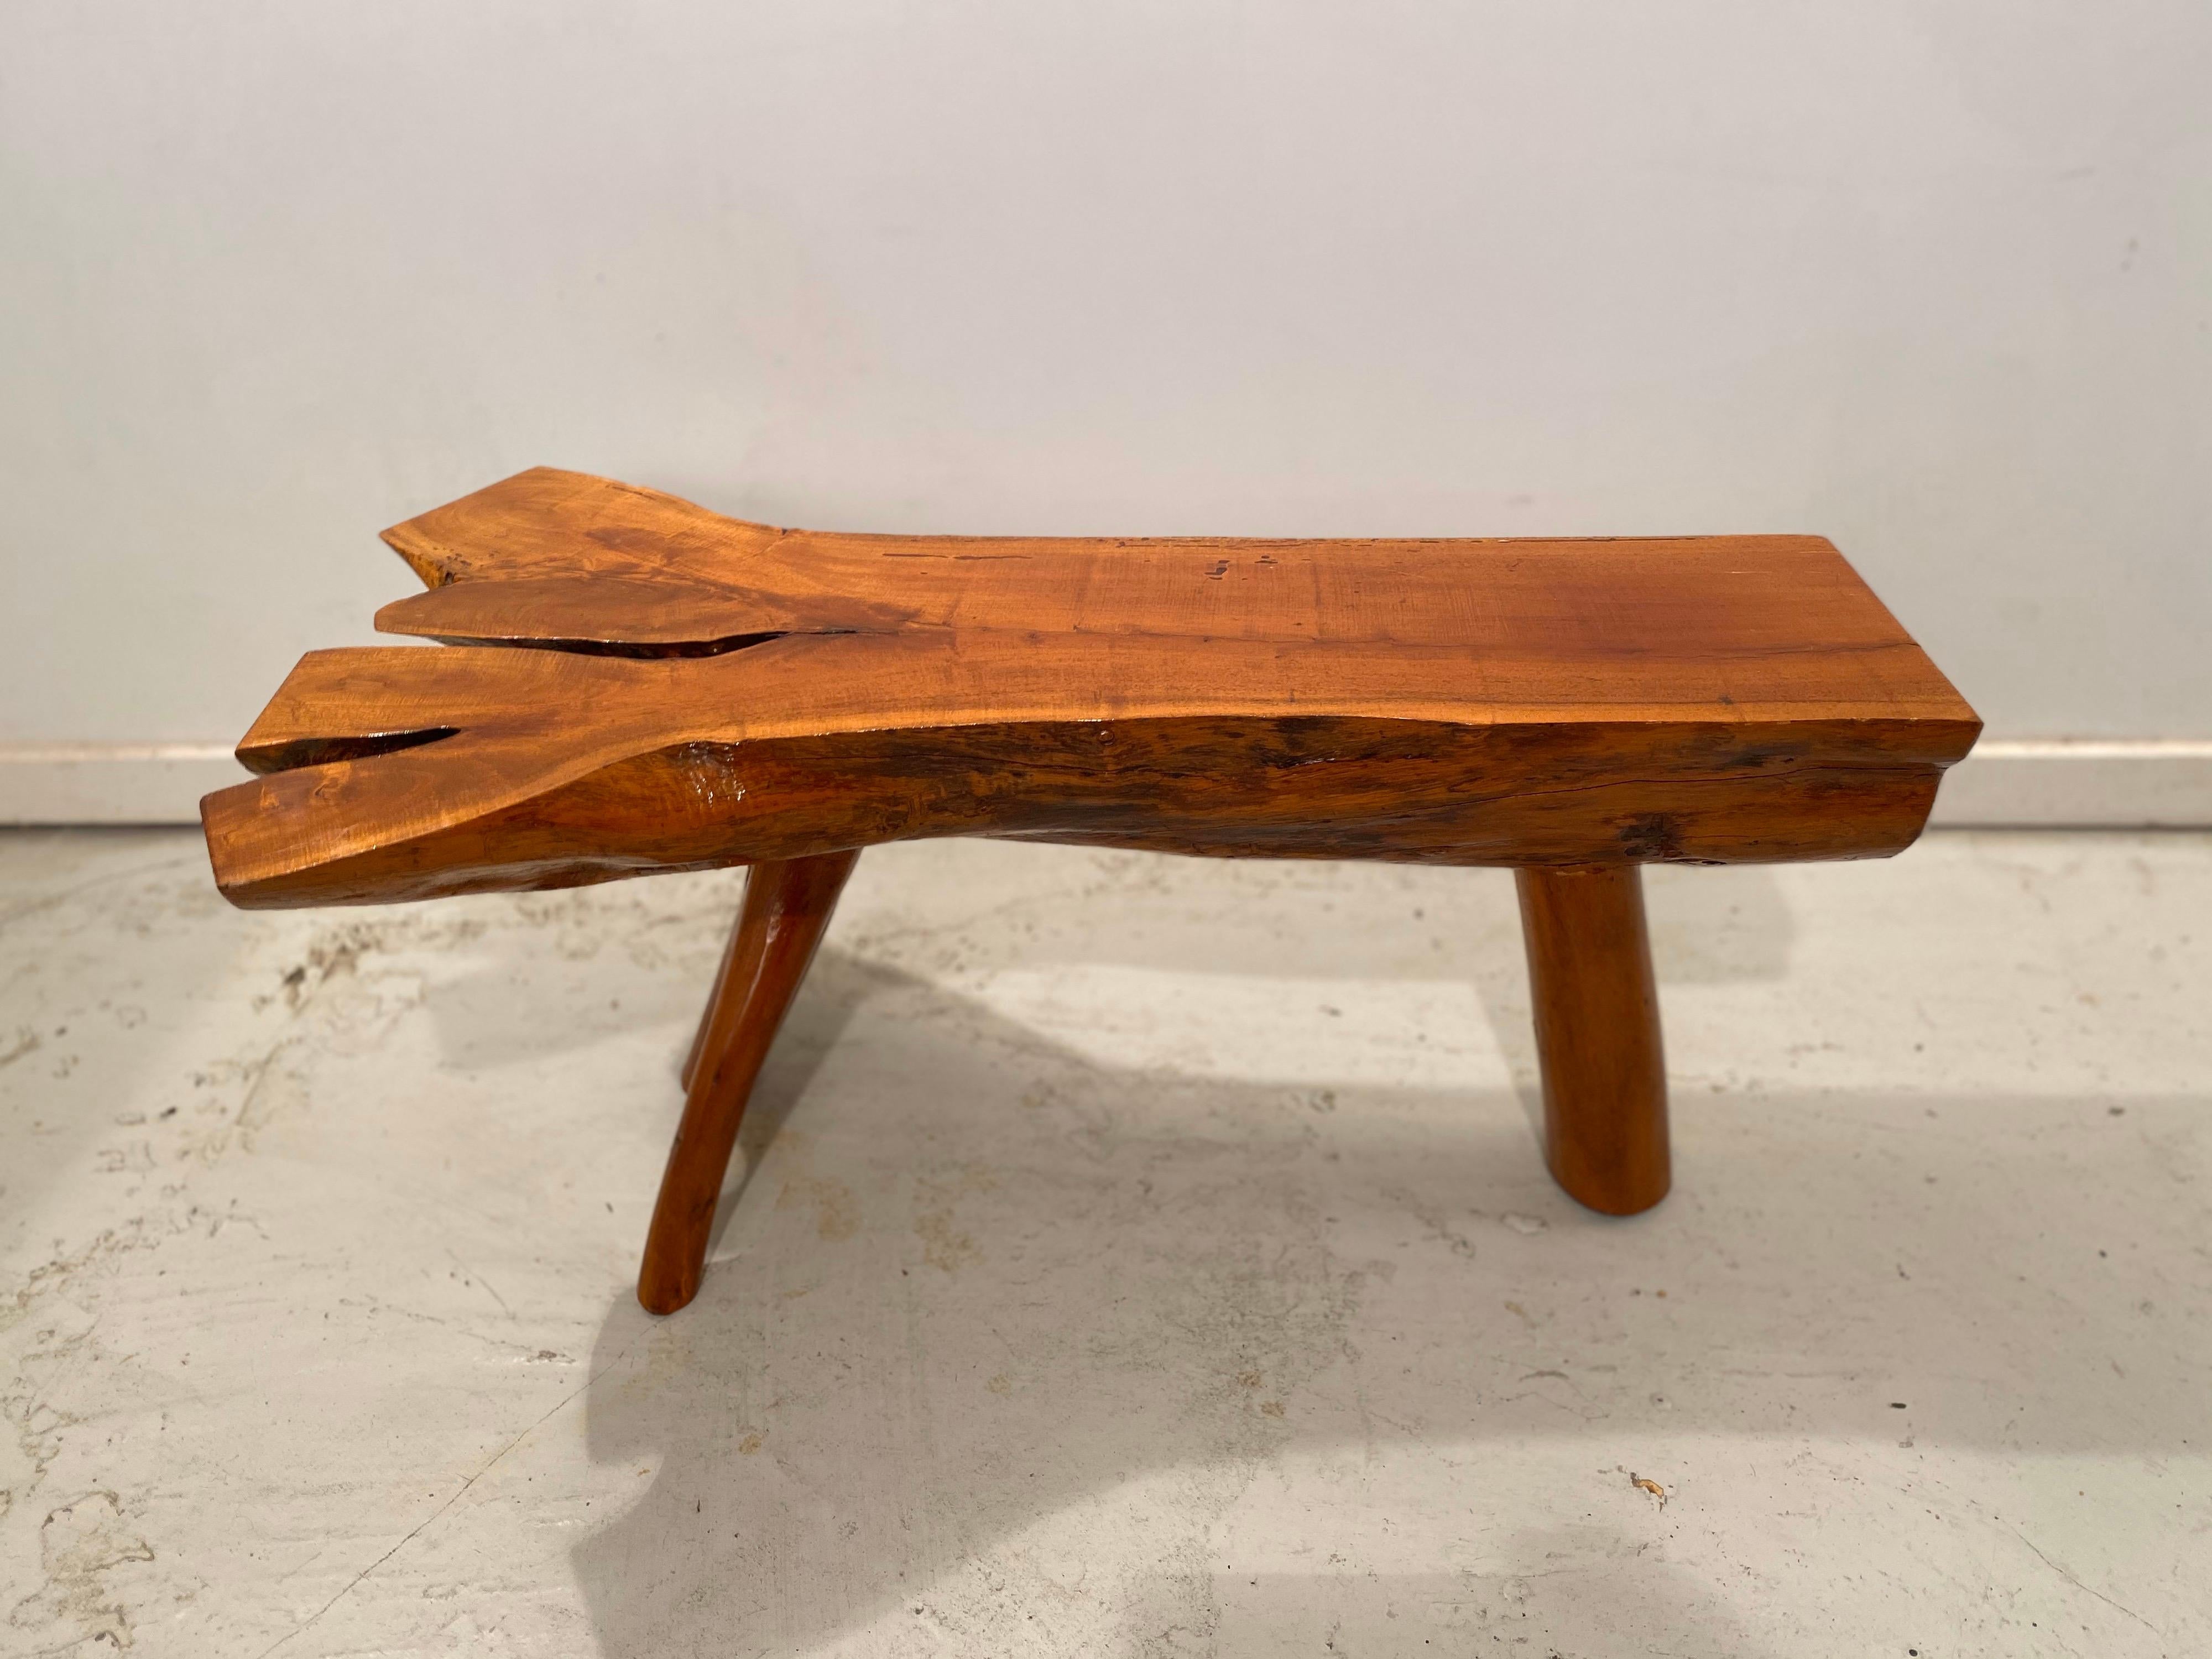 Beautifully hand-crafted plank split log red-oak side table or bench standing on three legs of which one amazing split branch. This is a completely organic piece, no nails at all are used and it is very heavy and sturdy. Also suitable for outdoor